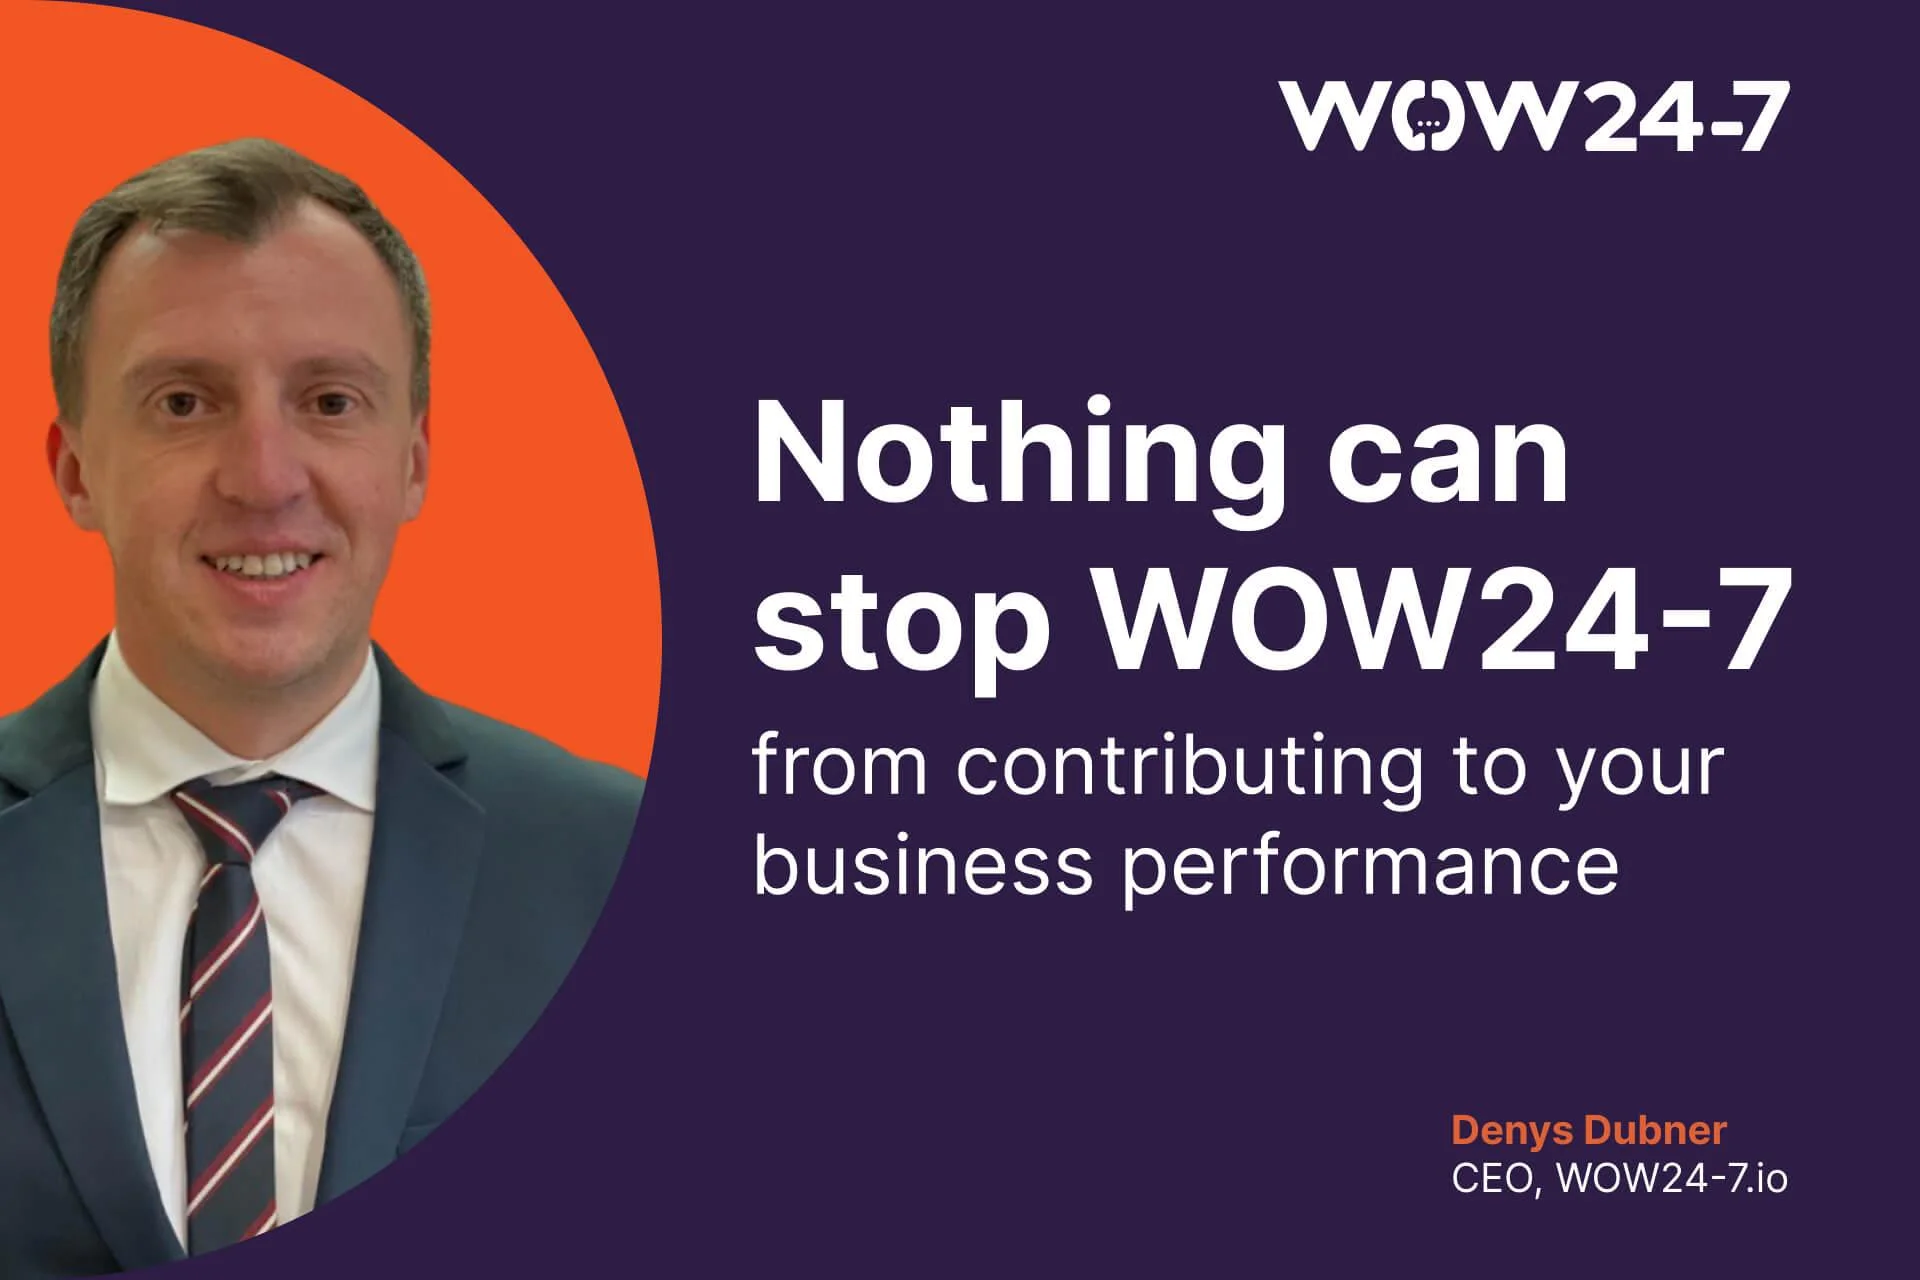 How did WOW24-7 guarantee 24/7 continuous customer support during electricity blackouts